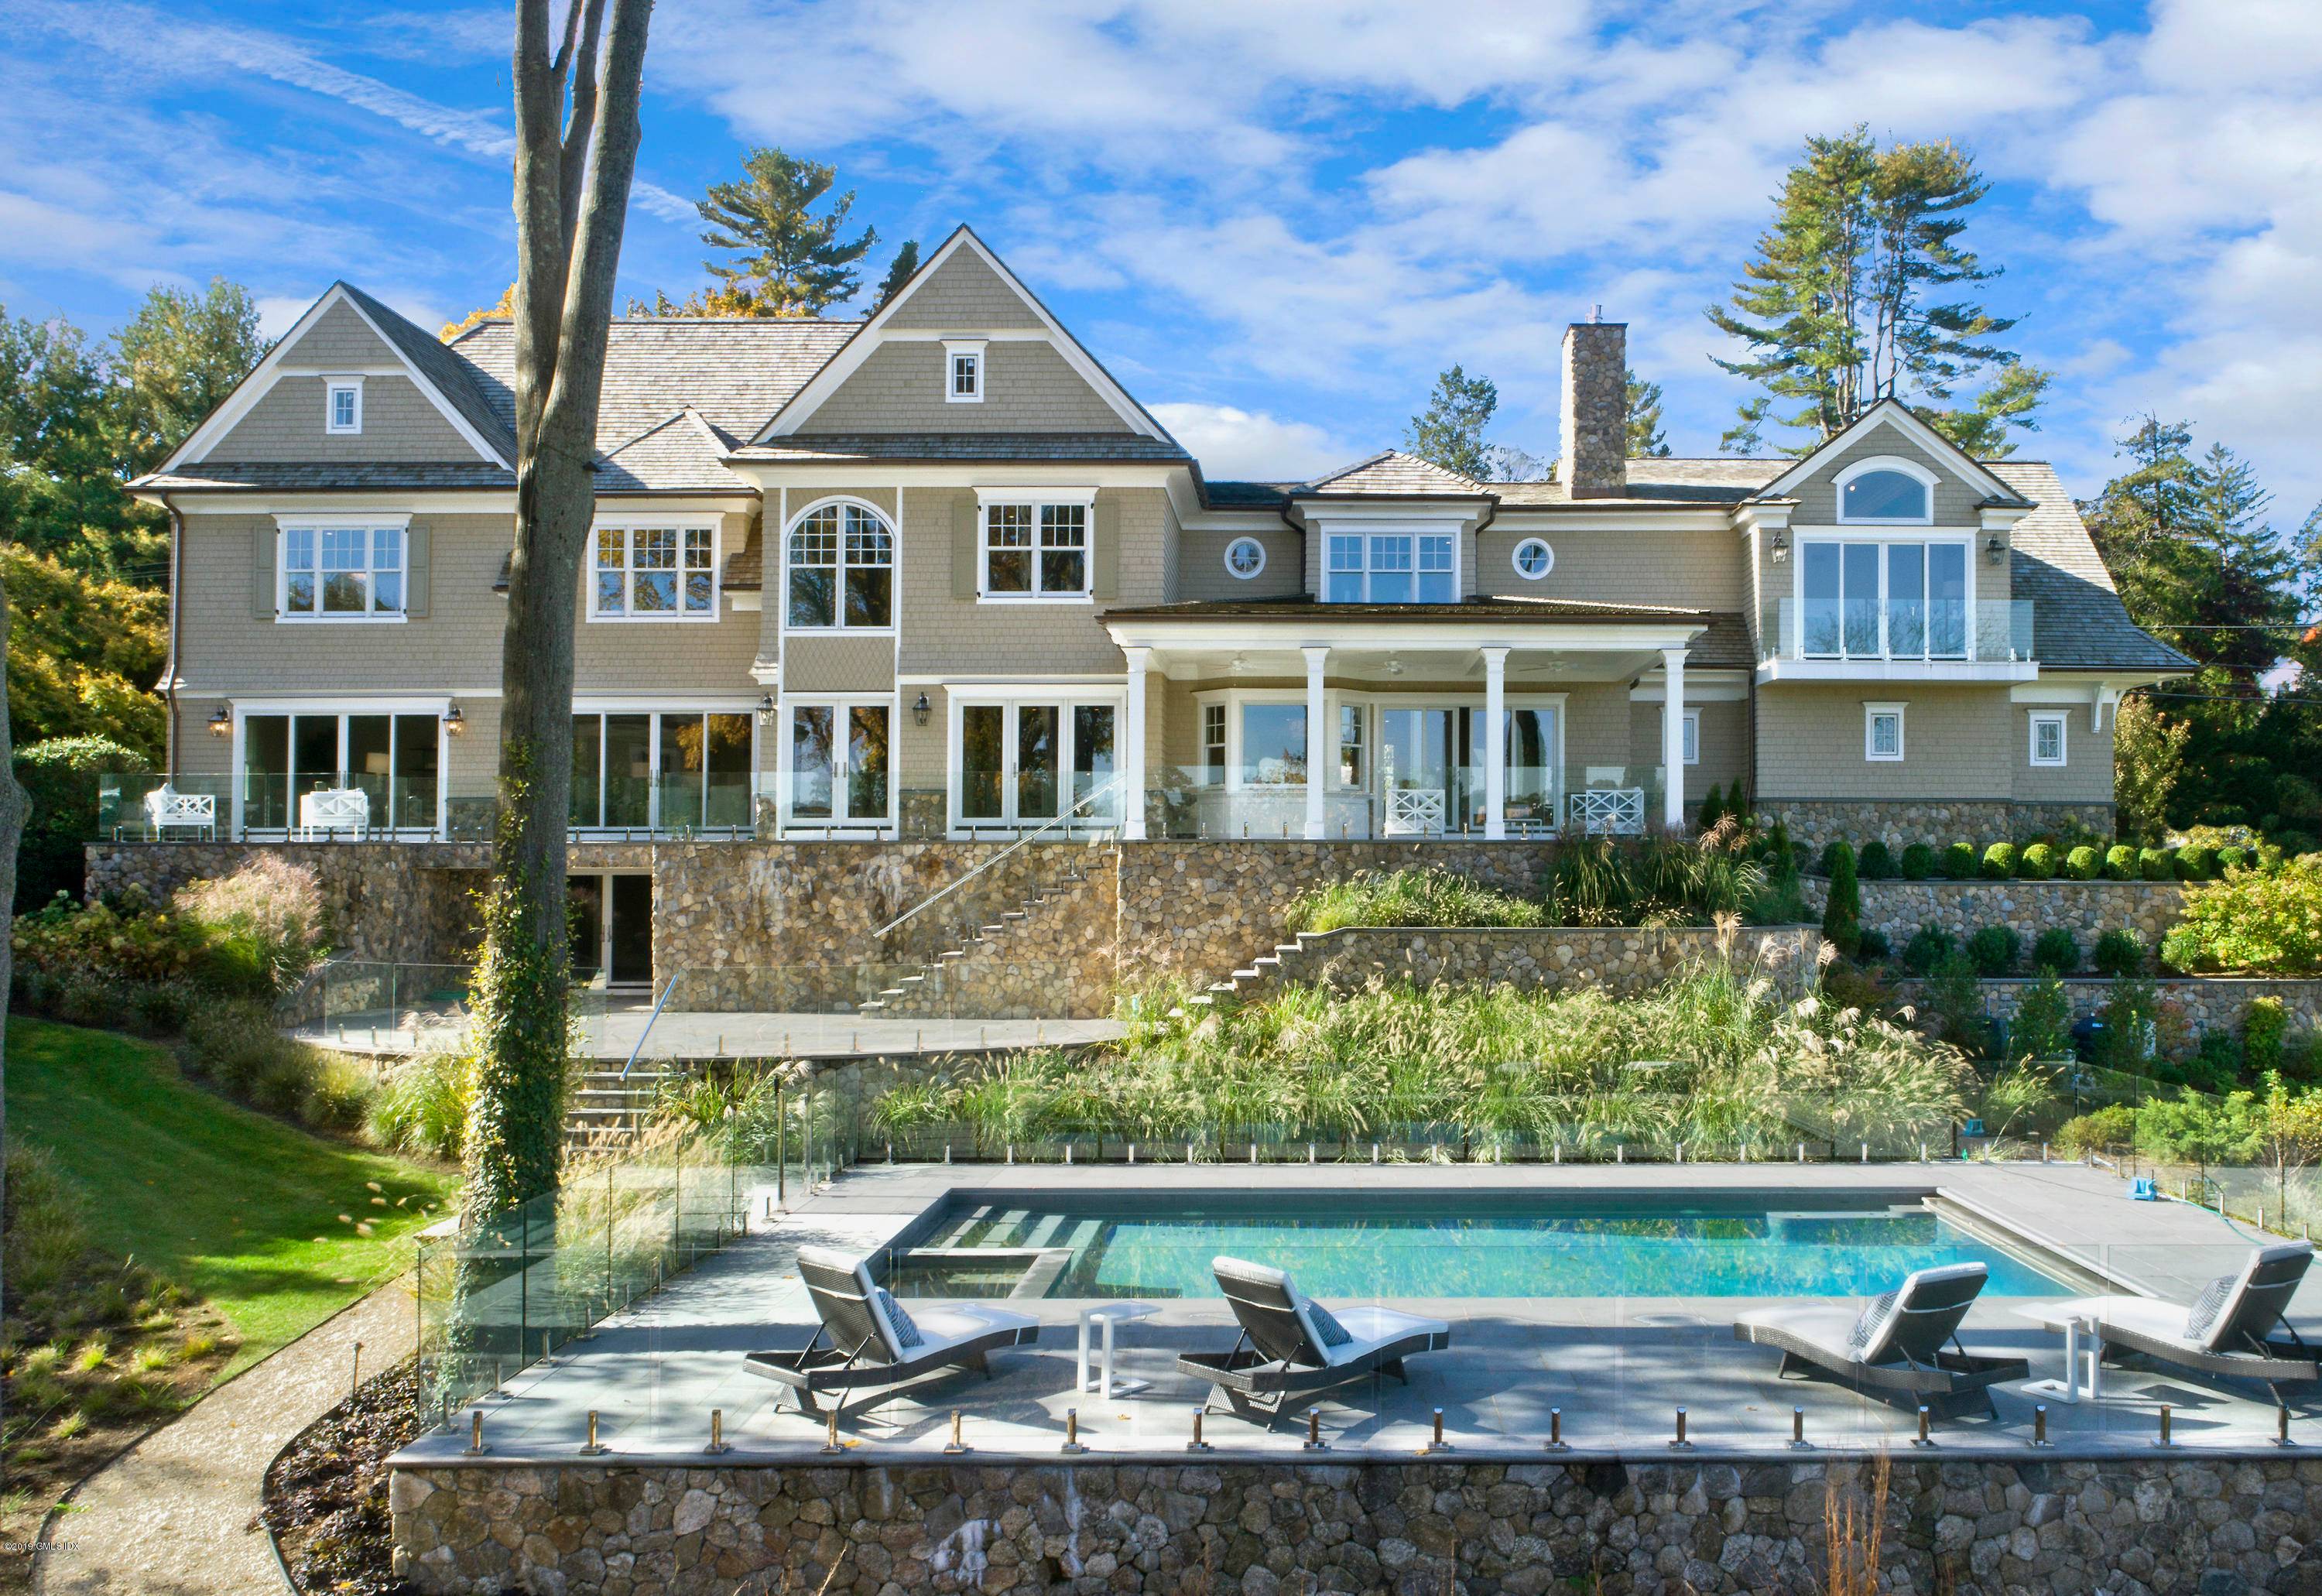 Masterful design meets modern luxury in this waterfront new construction.